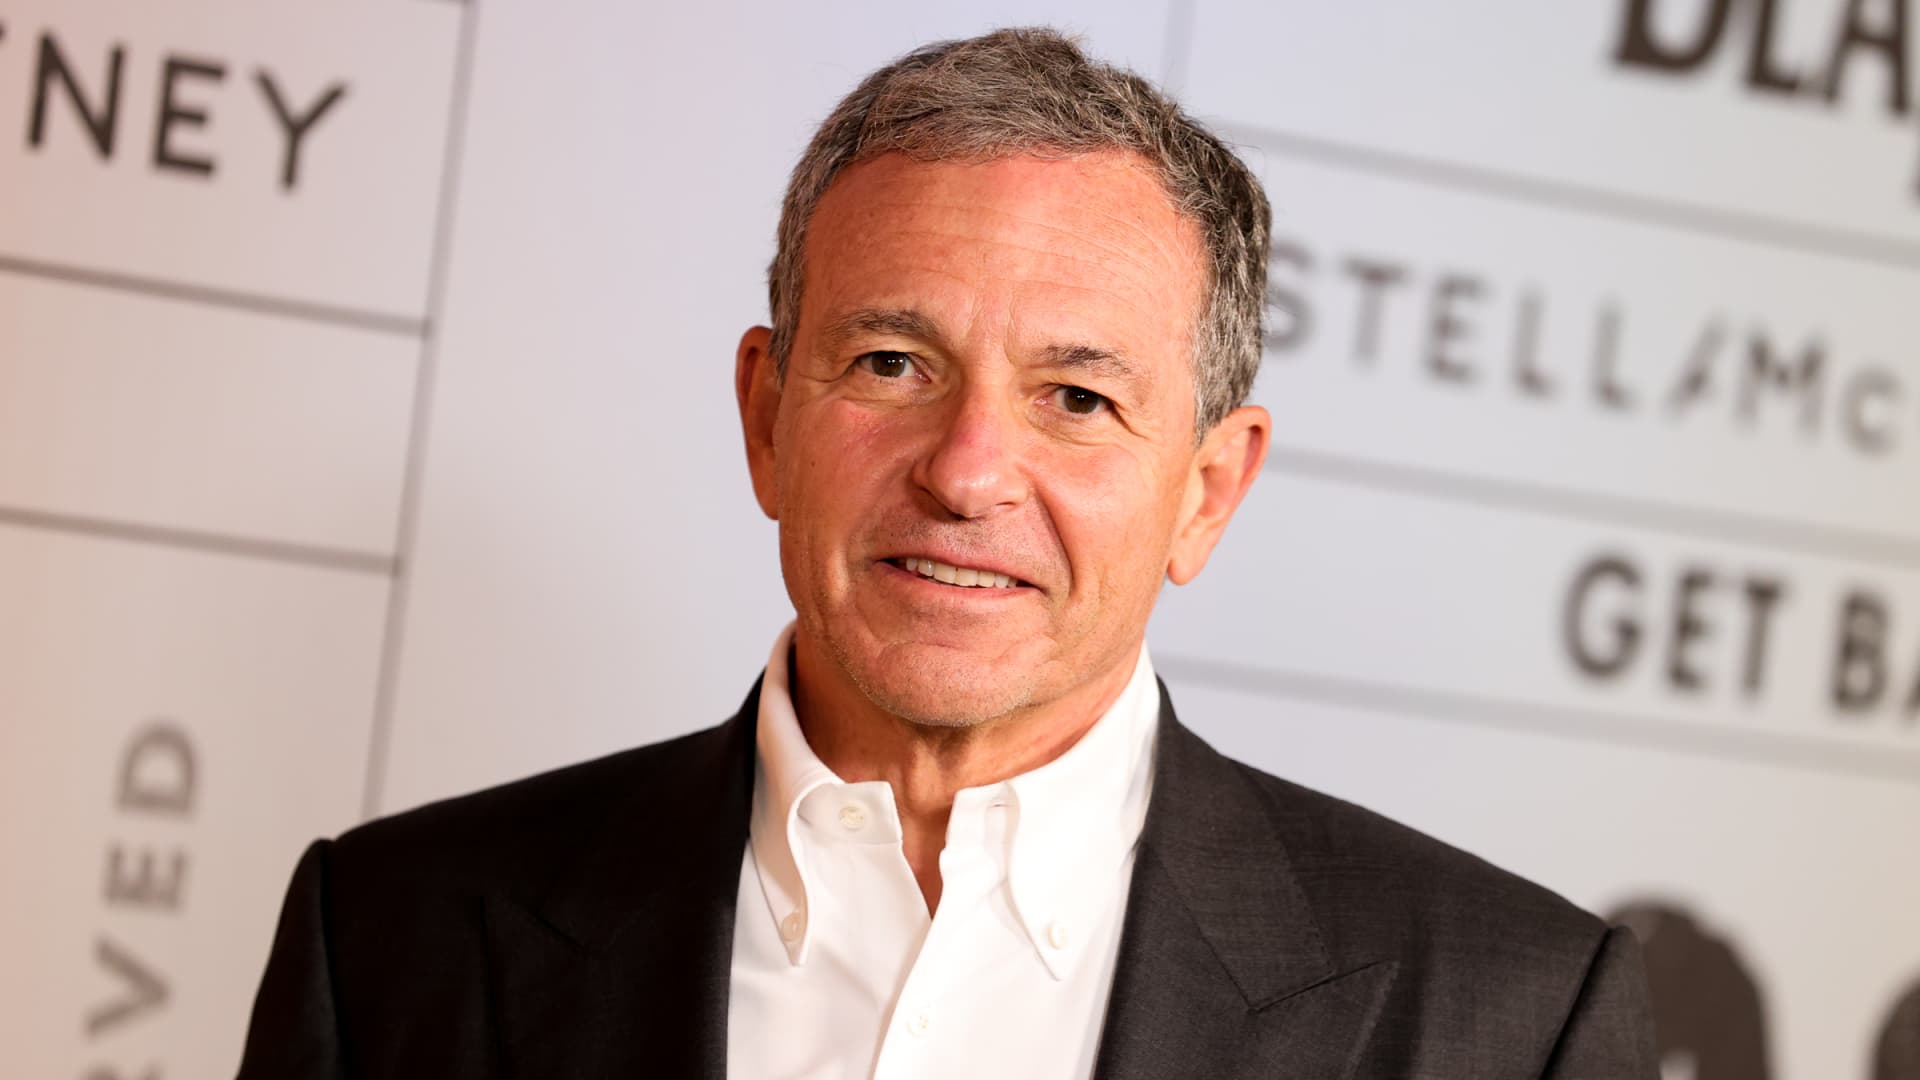 Moviegoing won’t return to pre-pandemic levels, says former Disney CEO Bob Iger